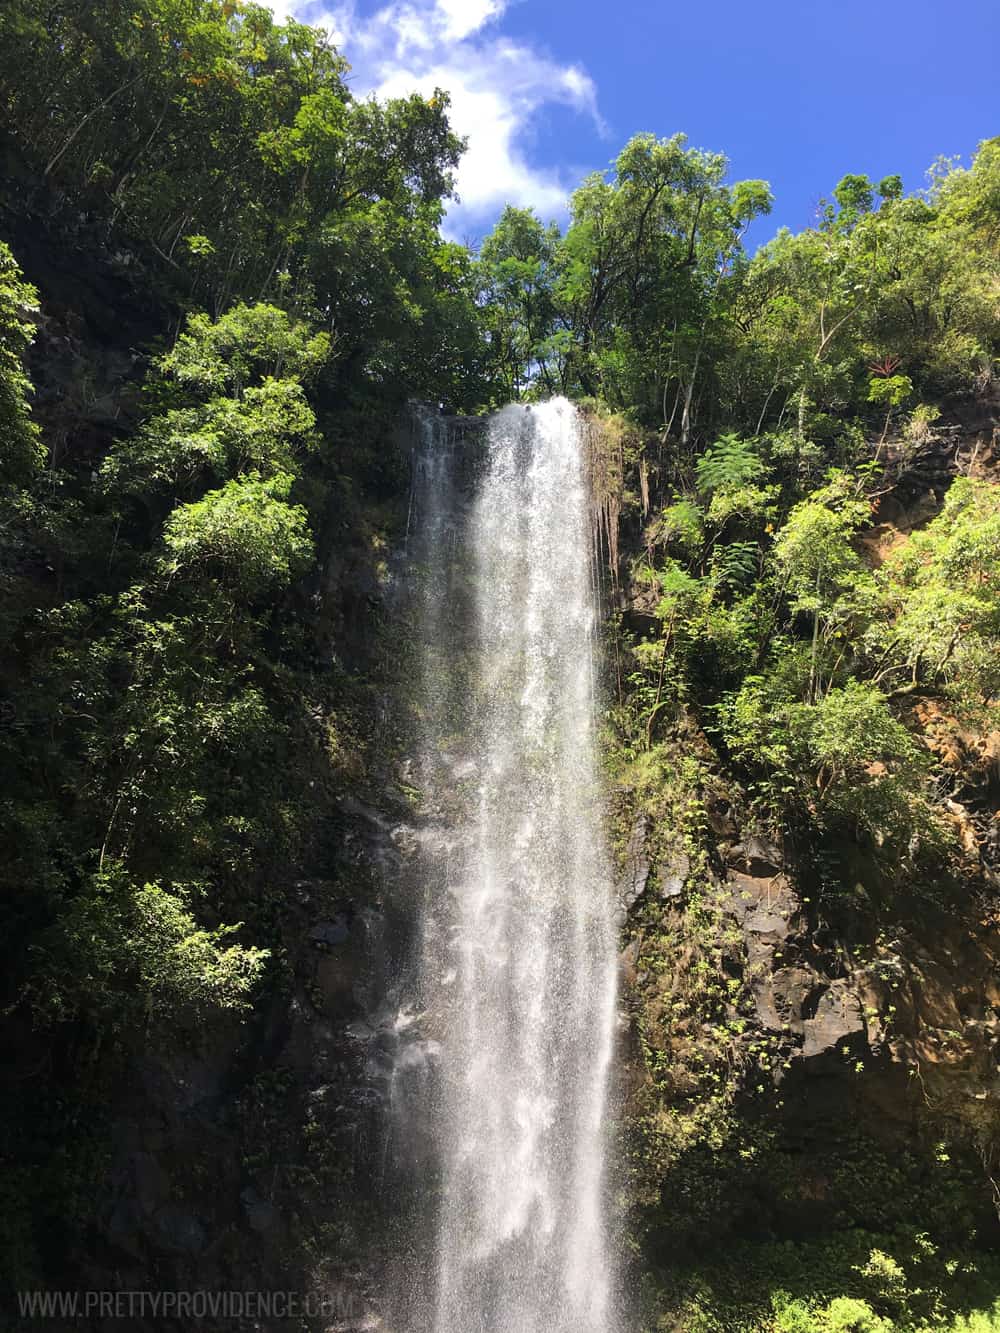 Must do when you go to Kauai! From what to do for fun, to where to eat, to where all the must have treats are! 